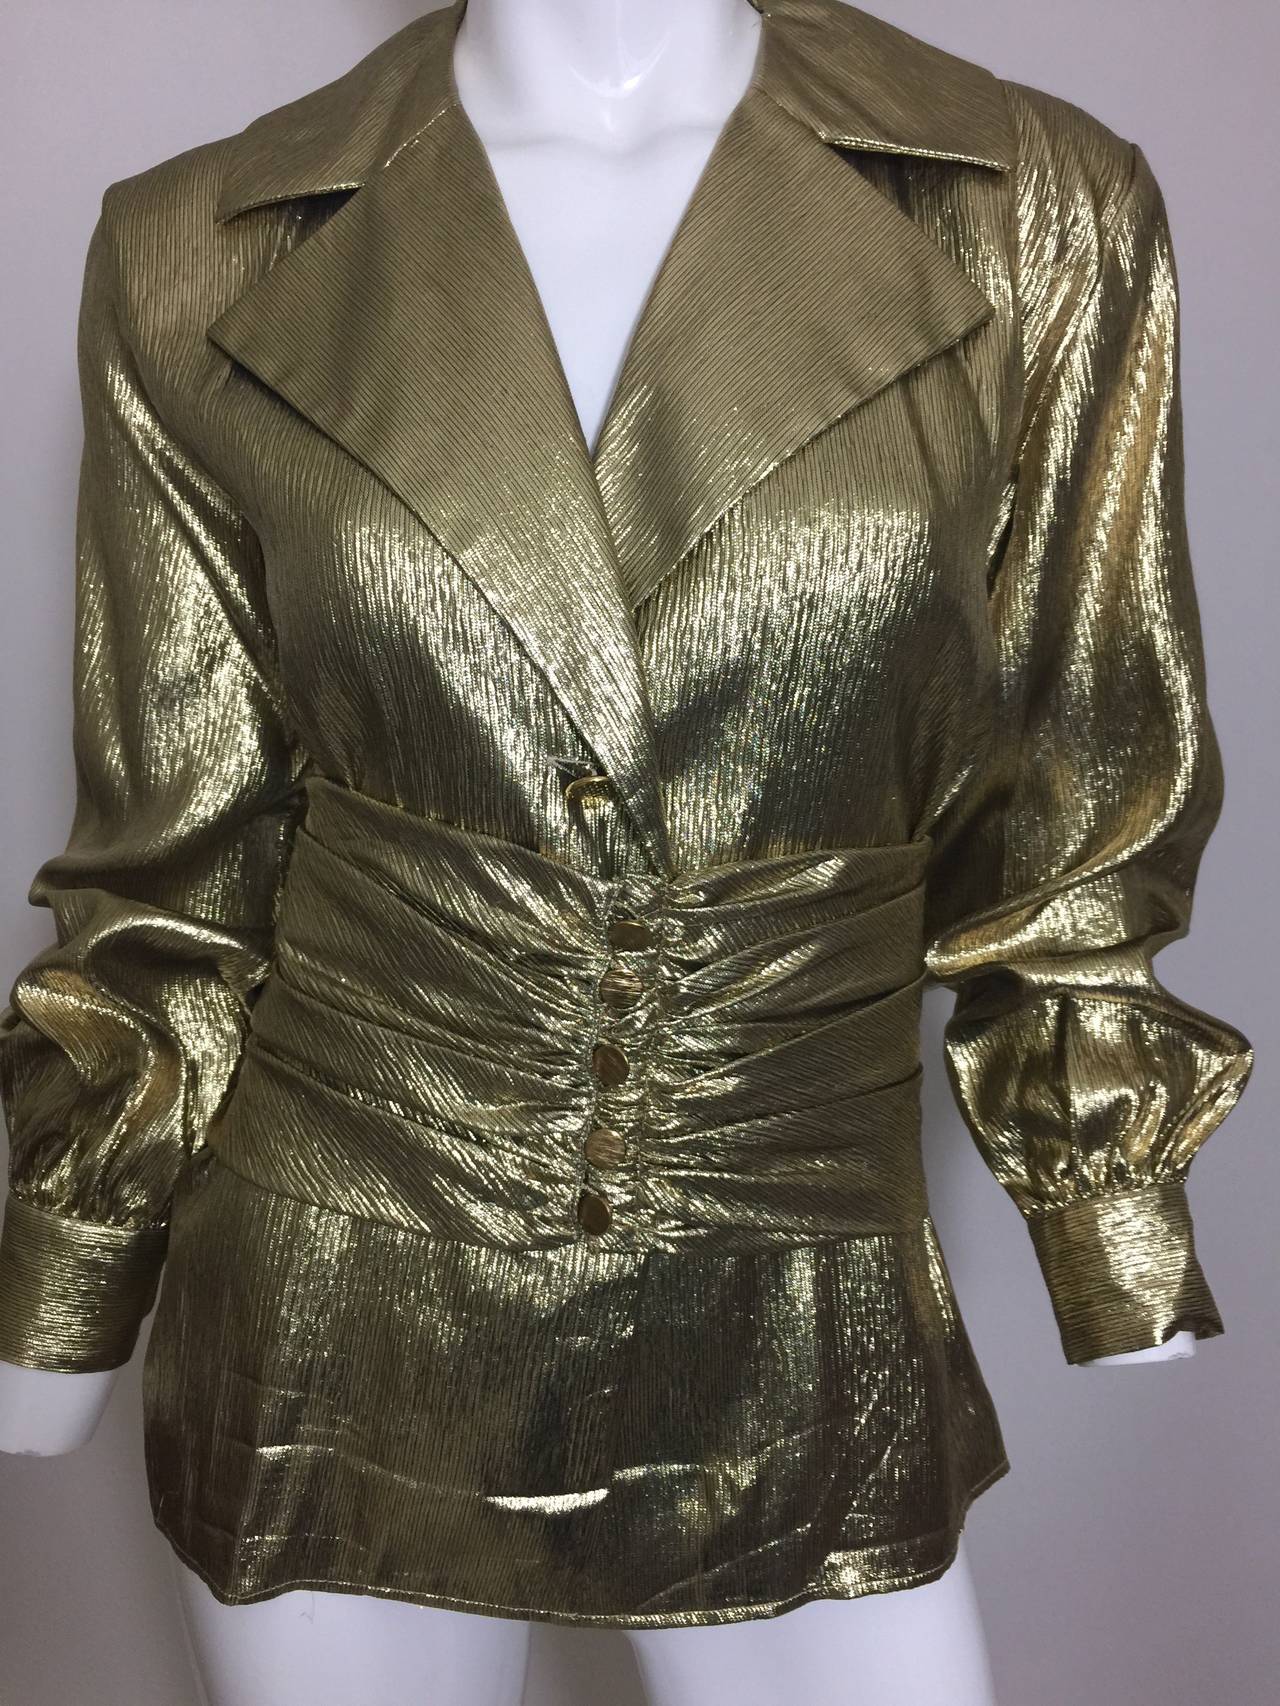 This is a vintage YSL lightweight gleaming metallic gold lame' blouse with a matching wide five button ruched belt 
The blouse has a relaxed fit with a 2 gold textured button front, and a single button cuff.

Excellent condition.
Please check